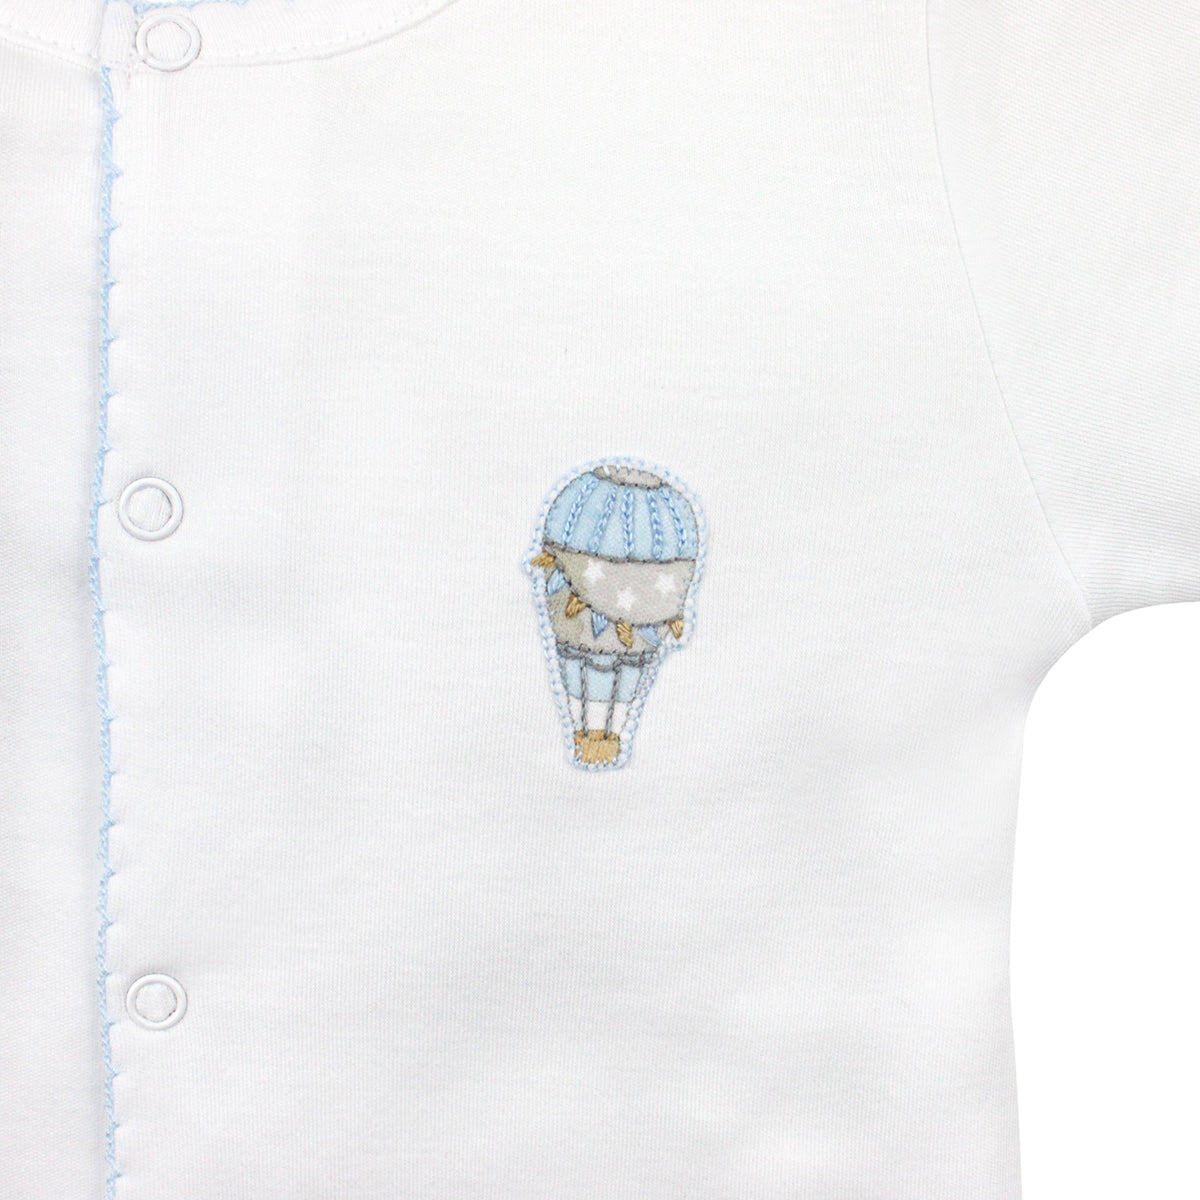 Fly Away Embroidery Footie | Baby Boy